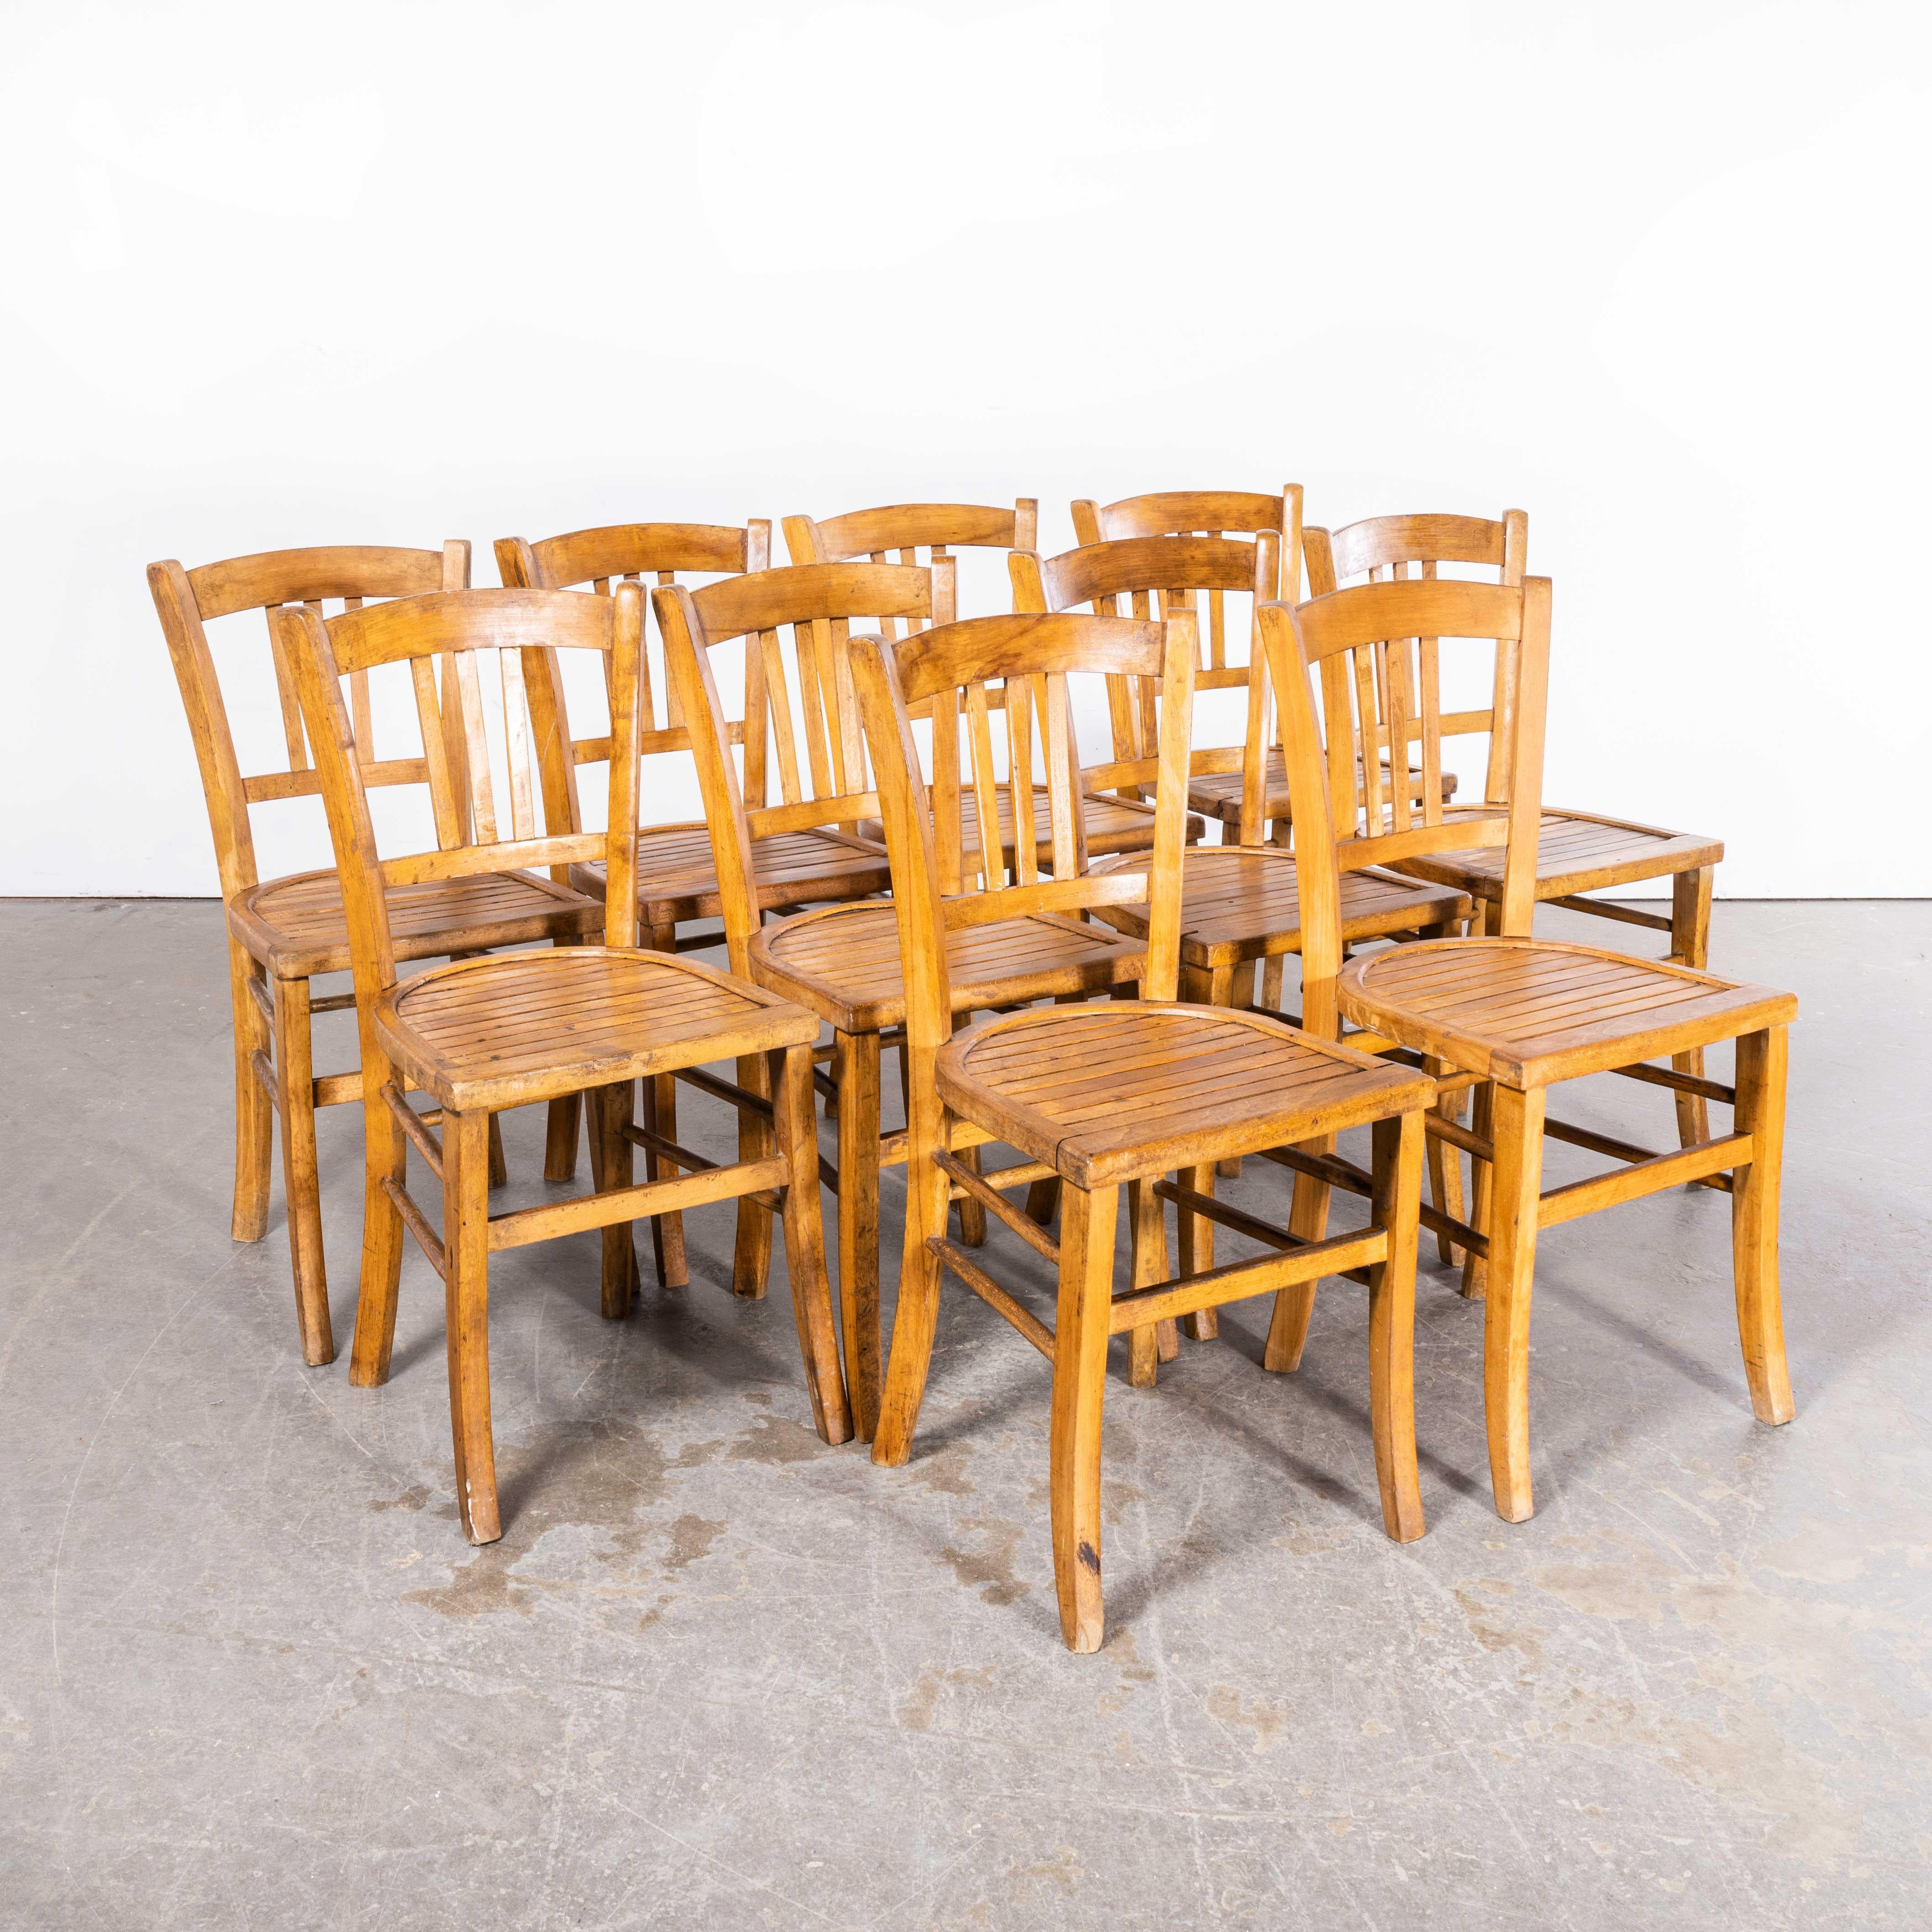 Original 1950's French Slatted Farmhouse Chairs From Provence - Set Of Ten en vente 2